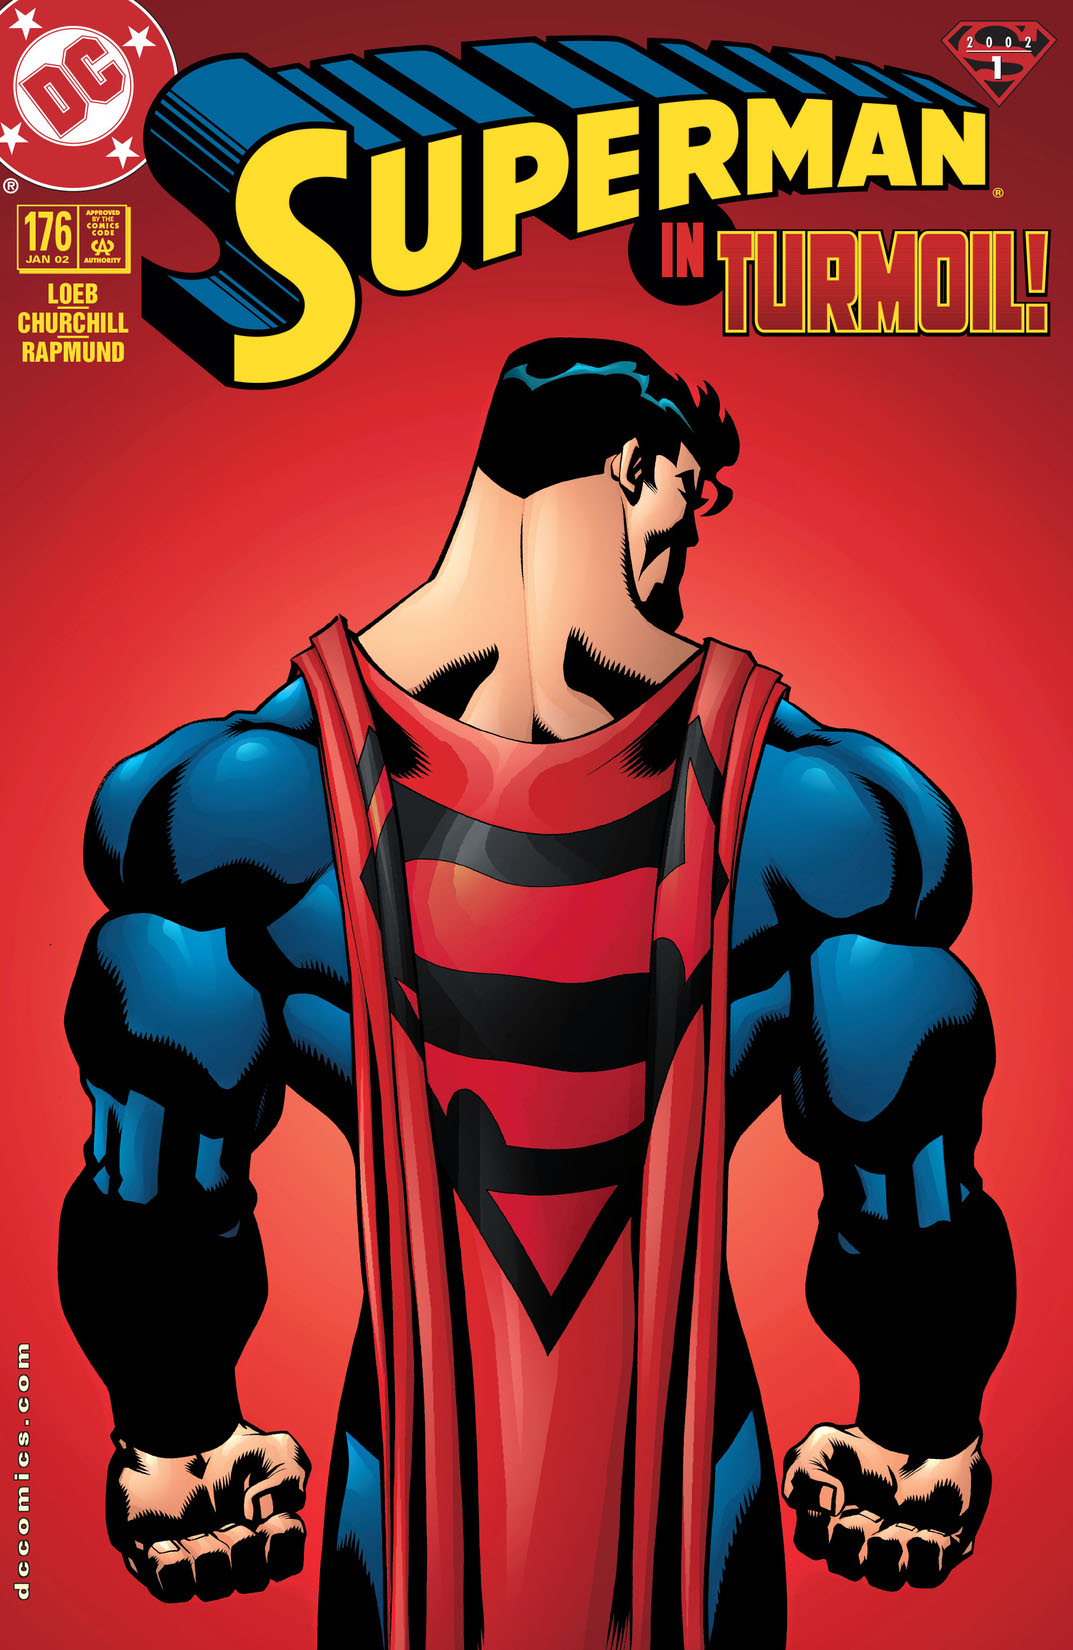 Superman (1986-2006) #176 preview images